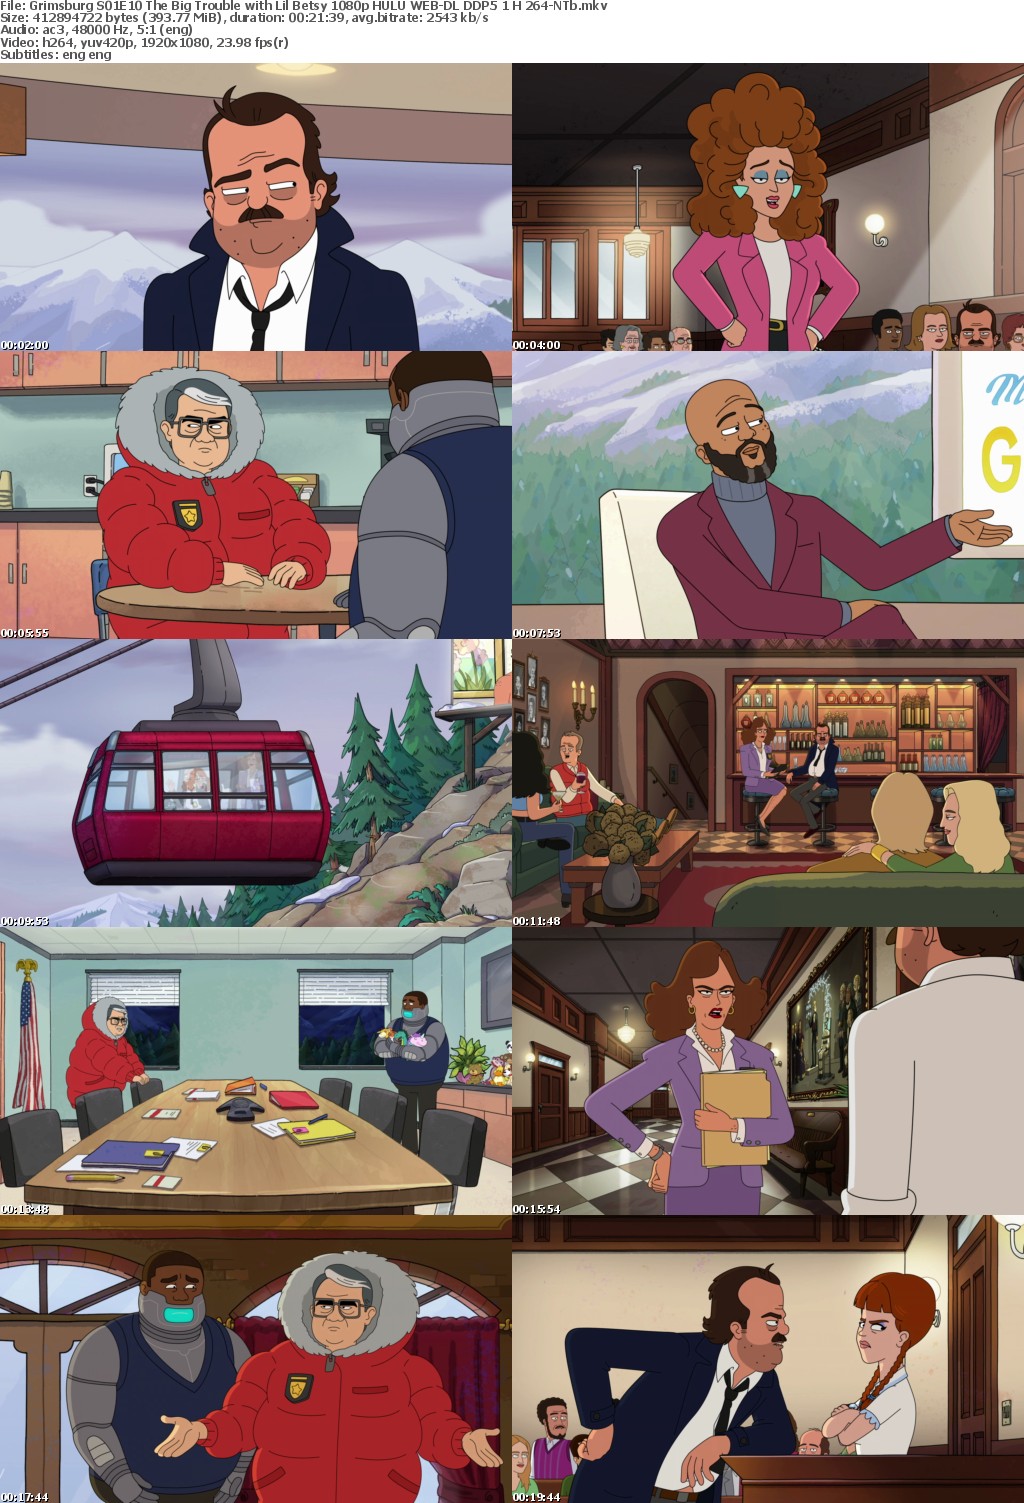 Grimsburg S01E10 The Big Trouble with Lil Betsy 1080p HULU WEB-DL DDP5 1 H 264-NTb